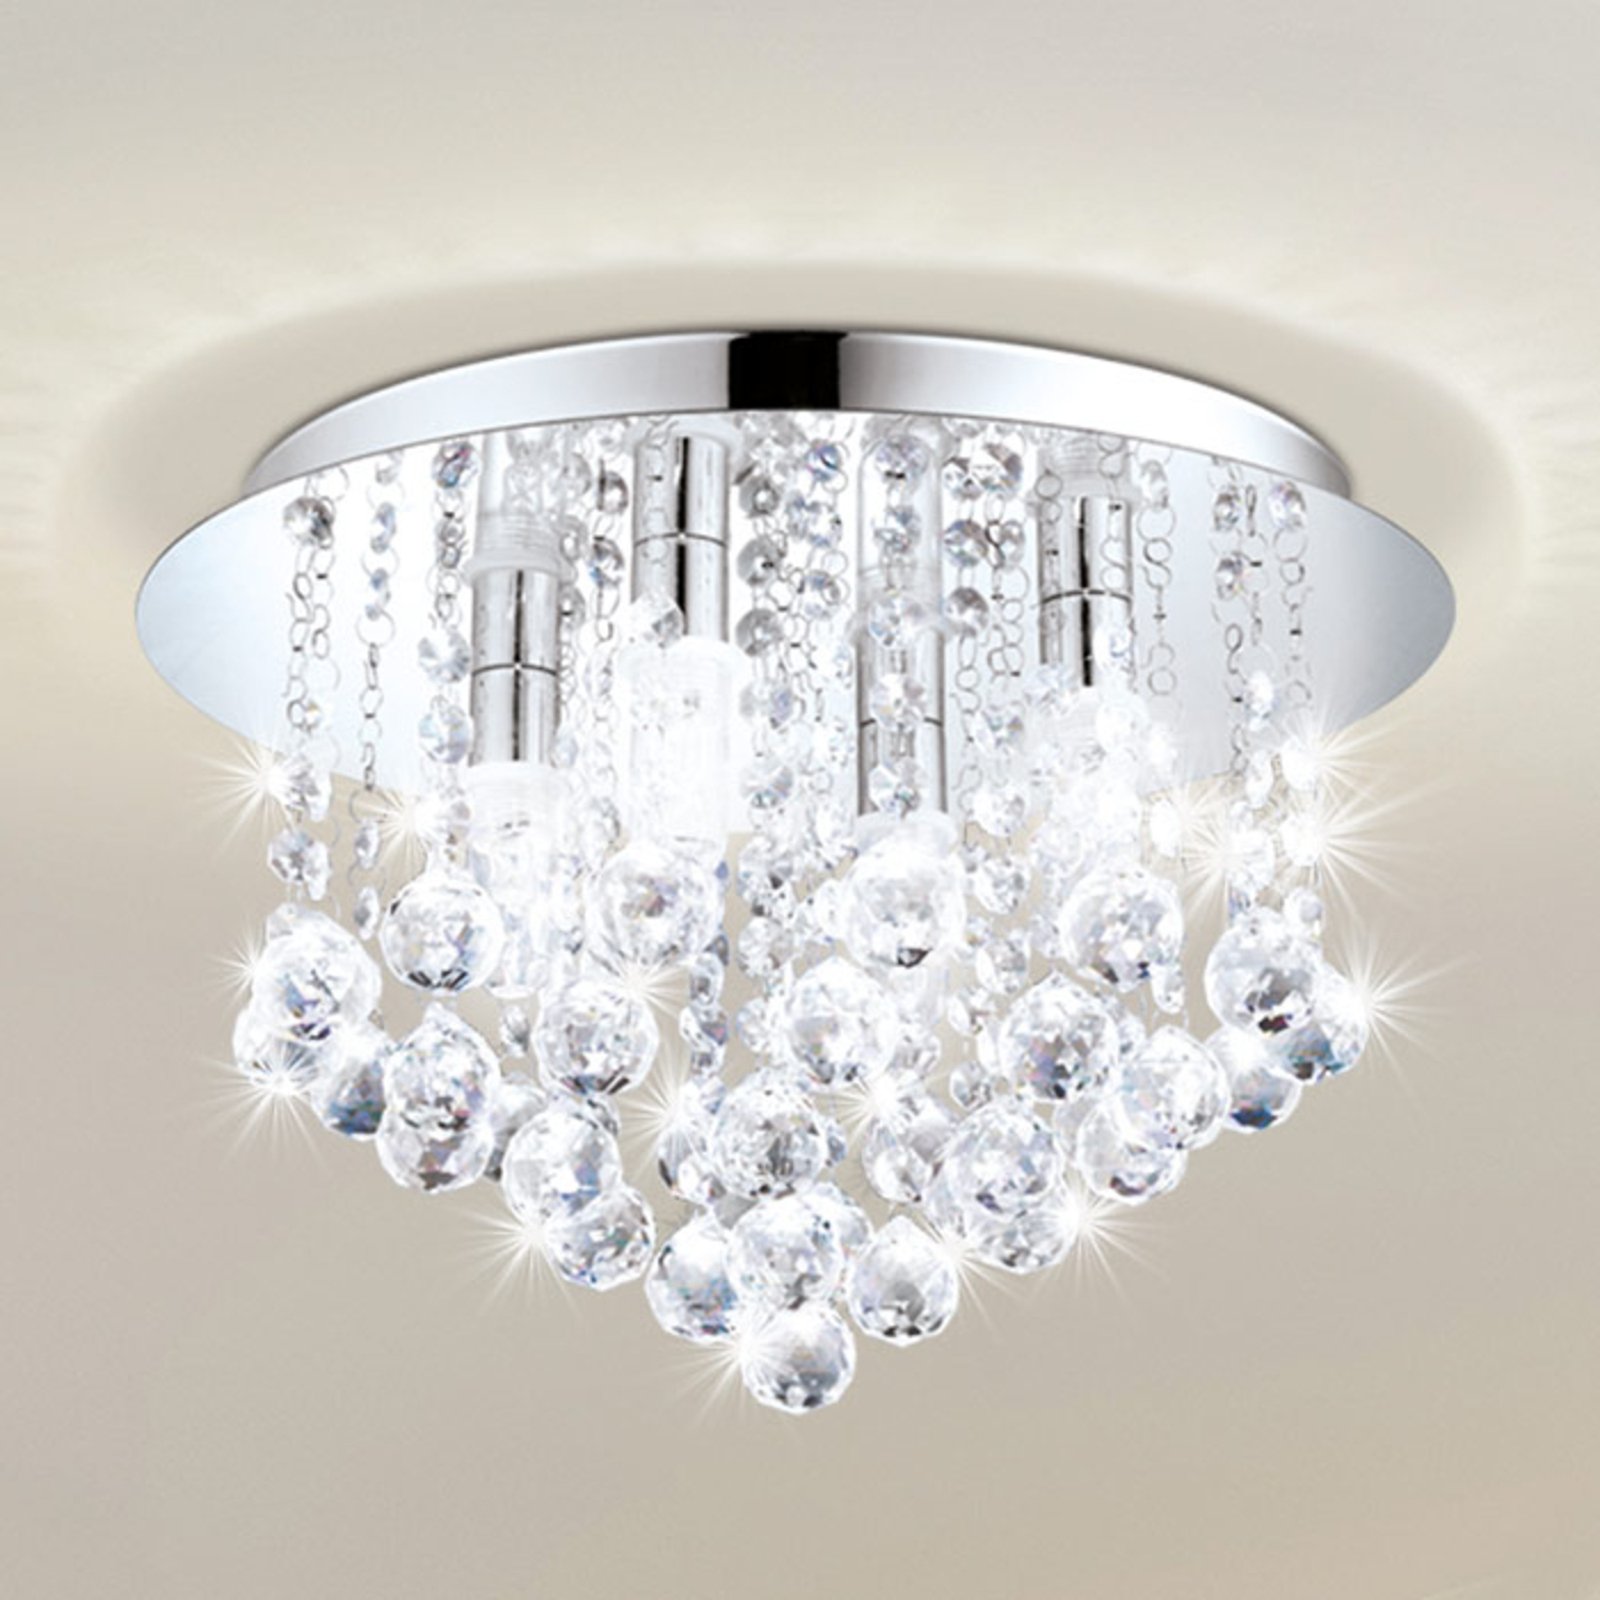 LED ceiling light Almonte with pendant, 50cm